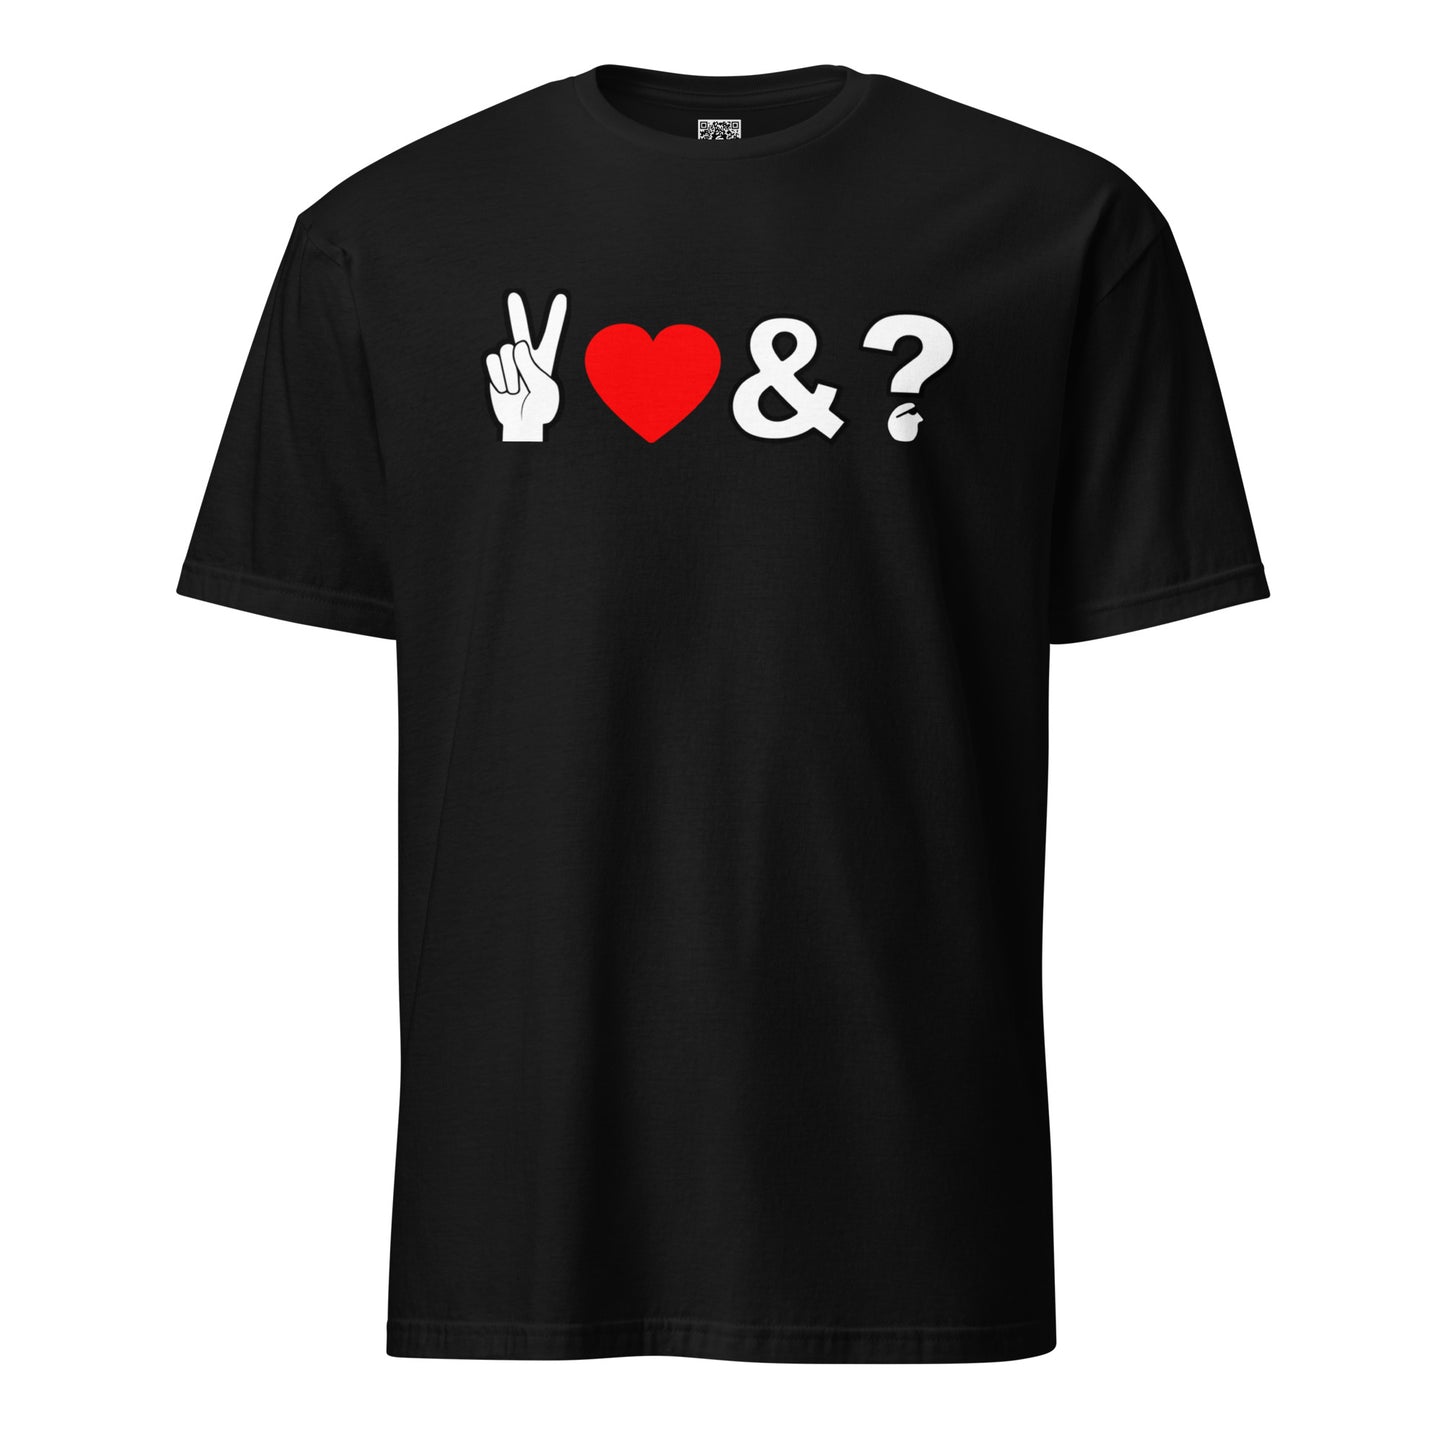 PEACE LOVE and WHAT LOGO Short-Sleeve Unisex T-Shirt